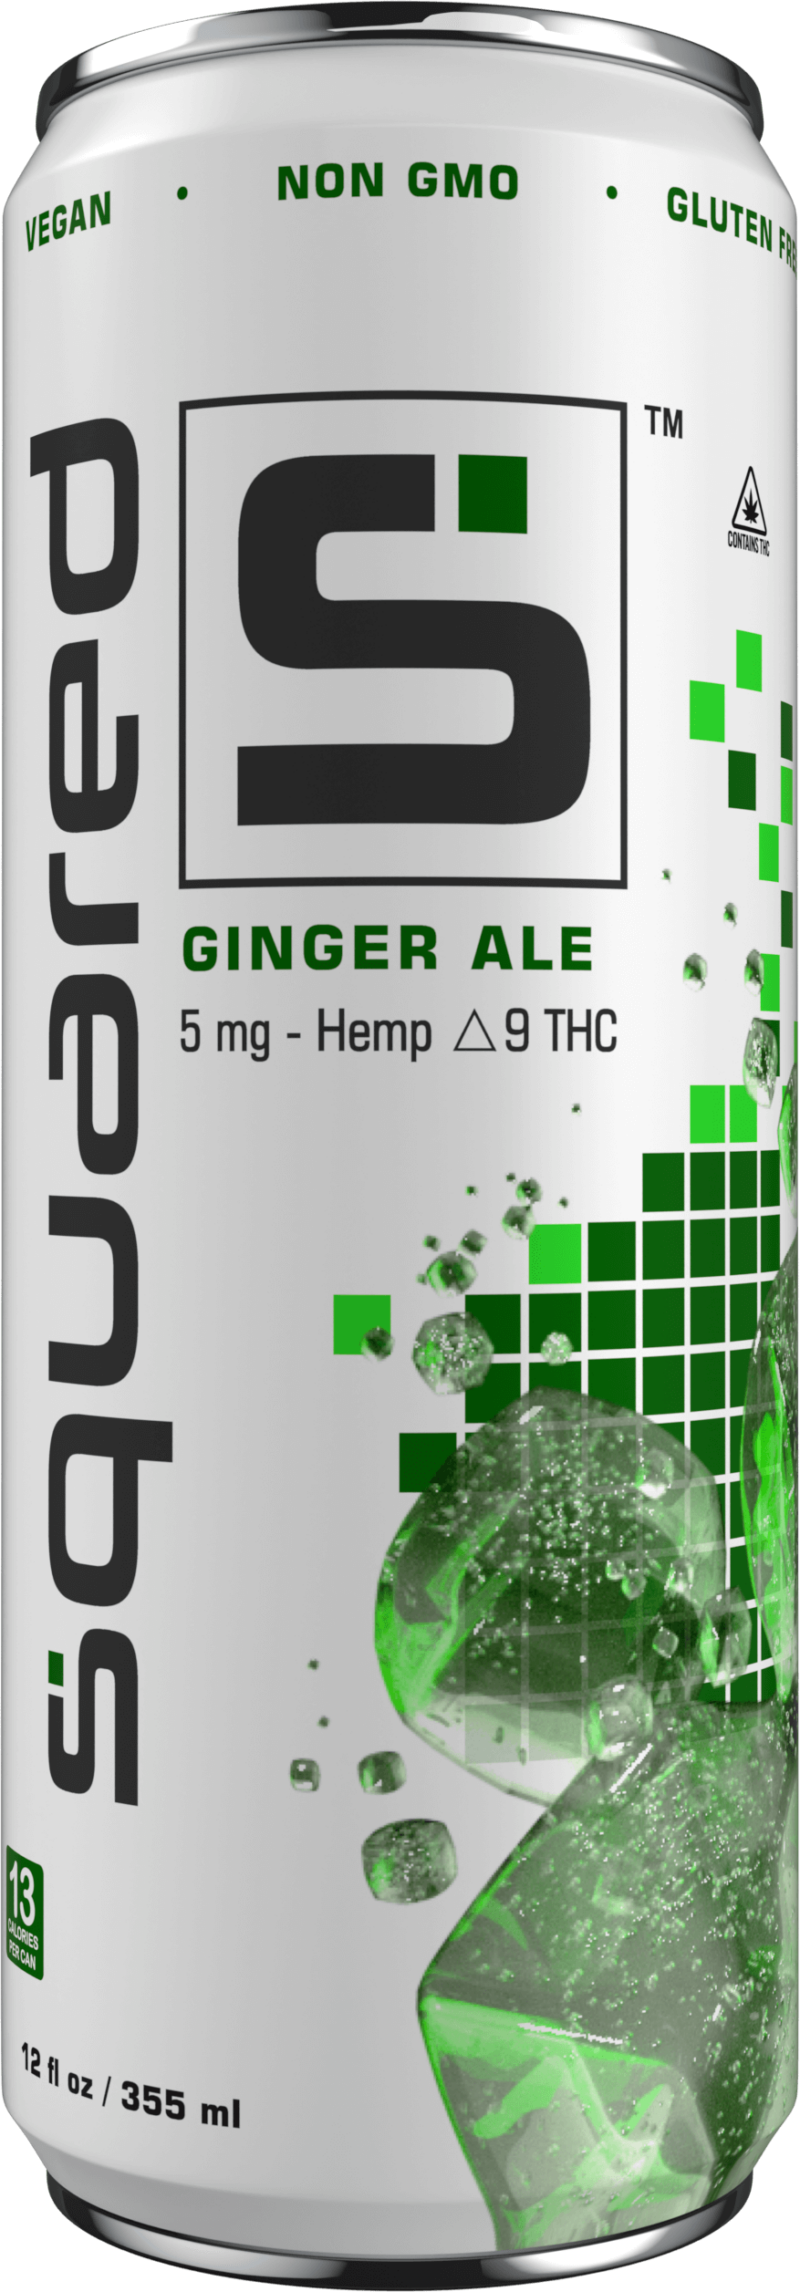 12 ounce sleek aluminum can of Ginger Ale by Squared